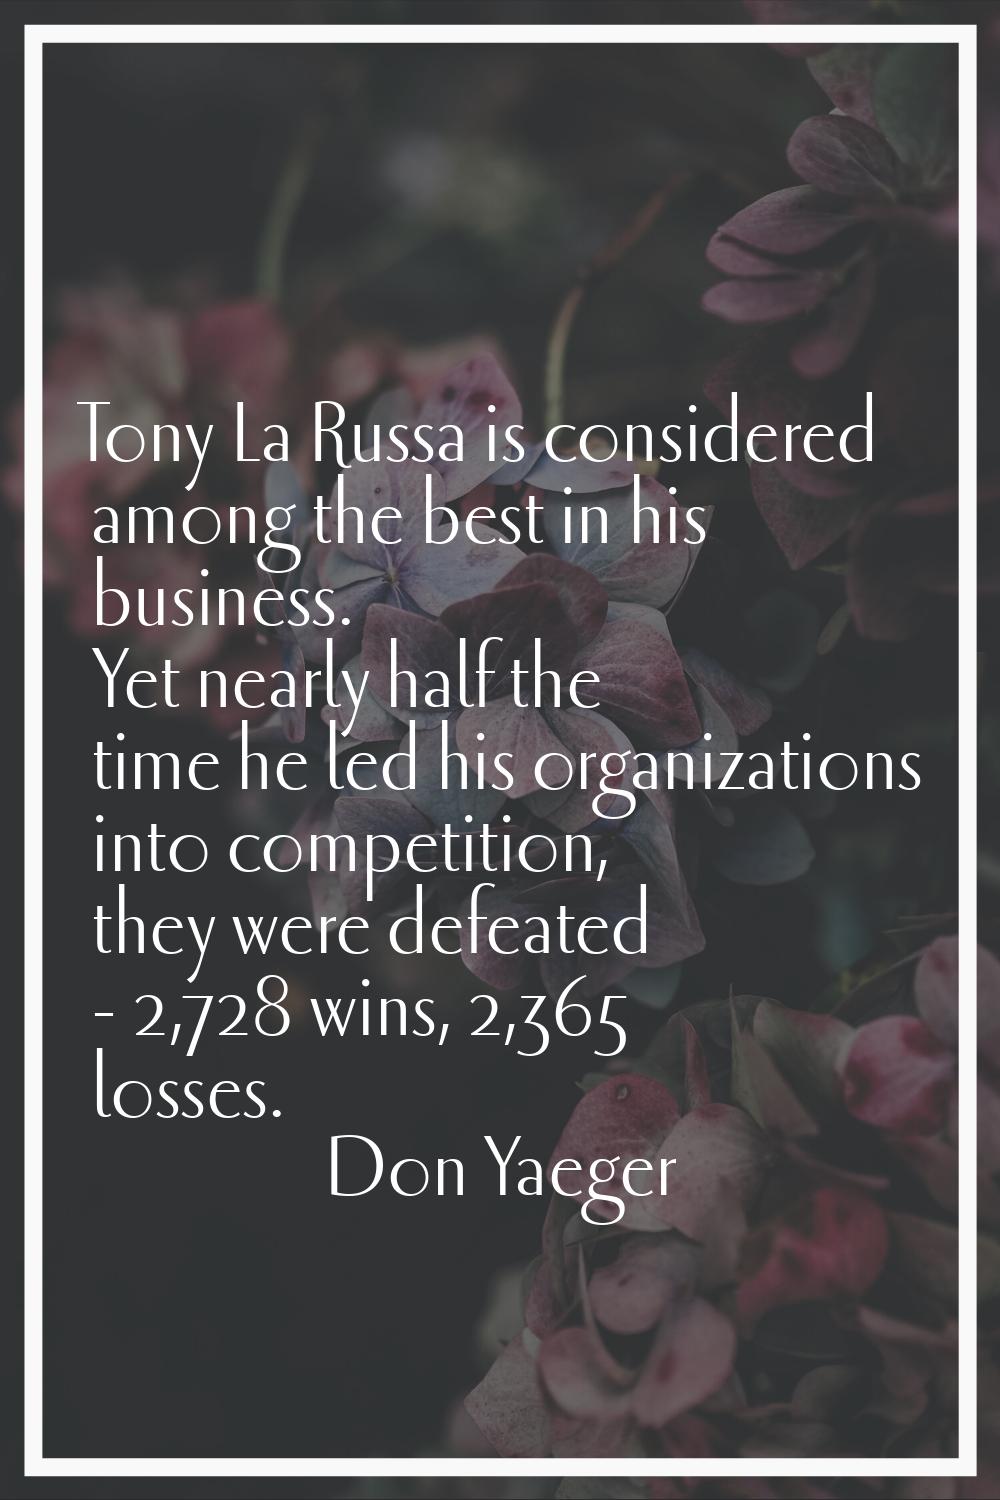 Tony La Russa is considered among the best in his business. Yet nearly half the time he led his org